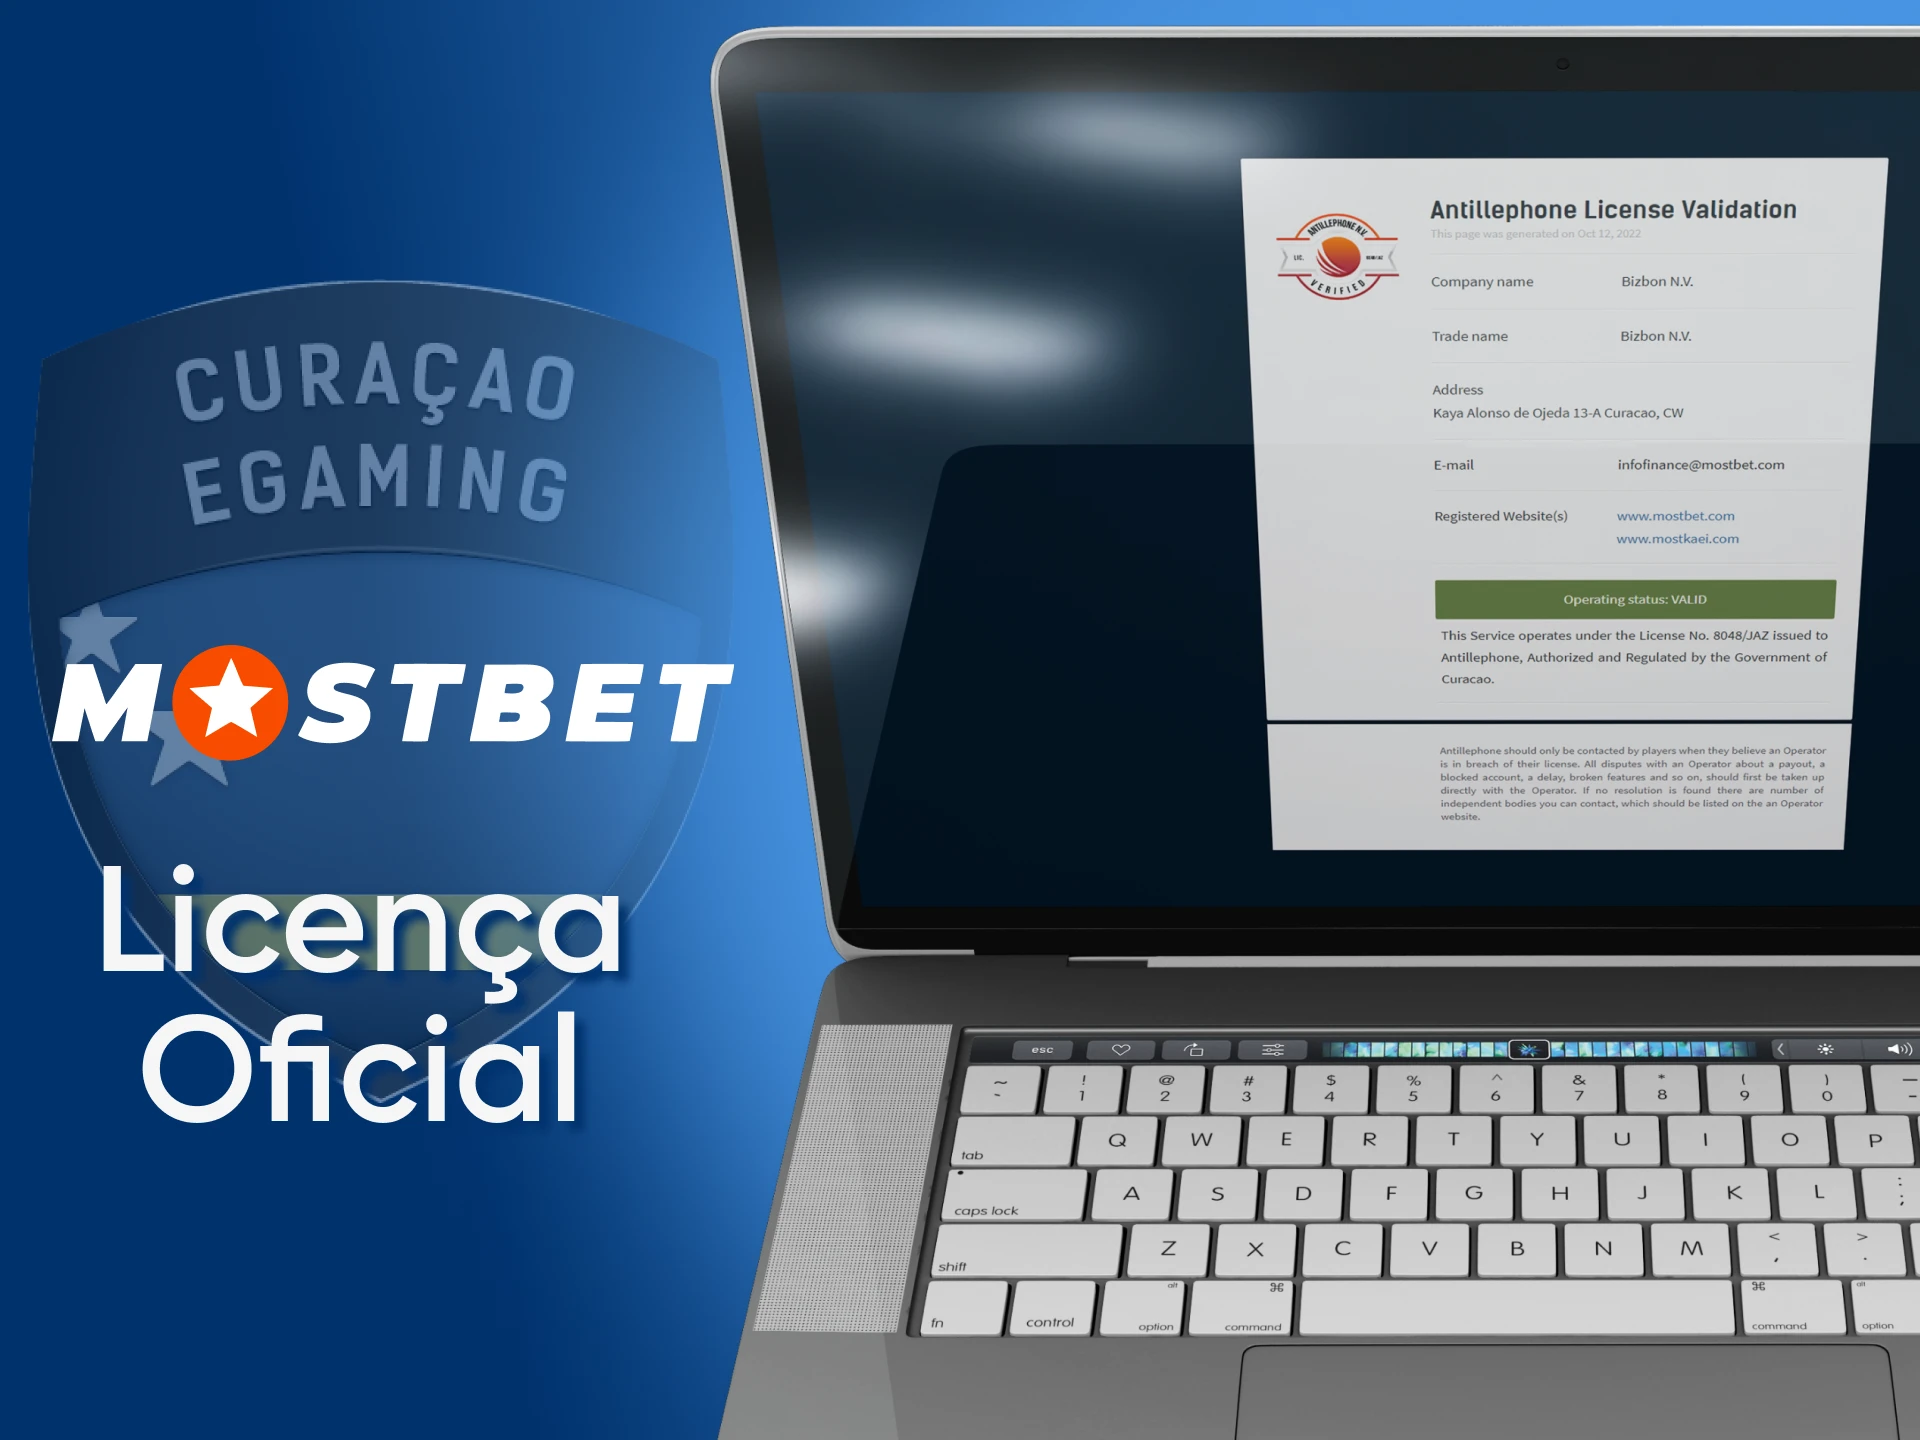 Mostbet received a license from Curaçao for sports betting and casinos.